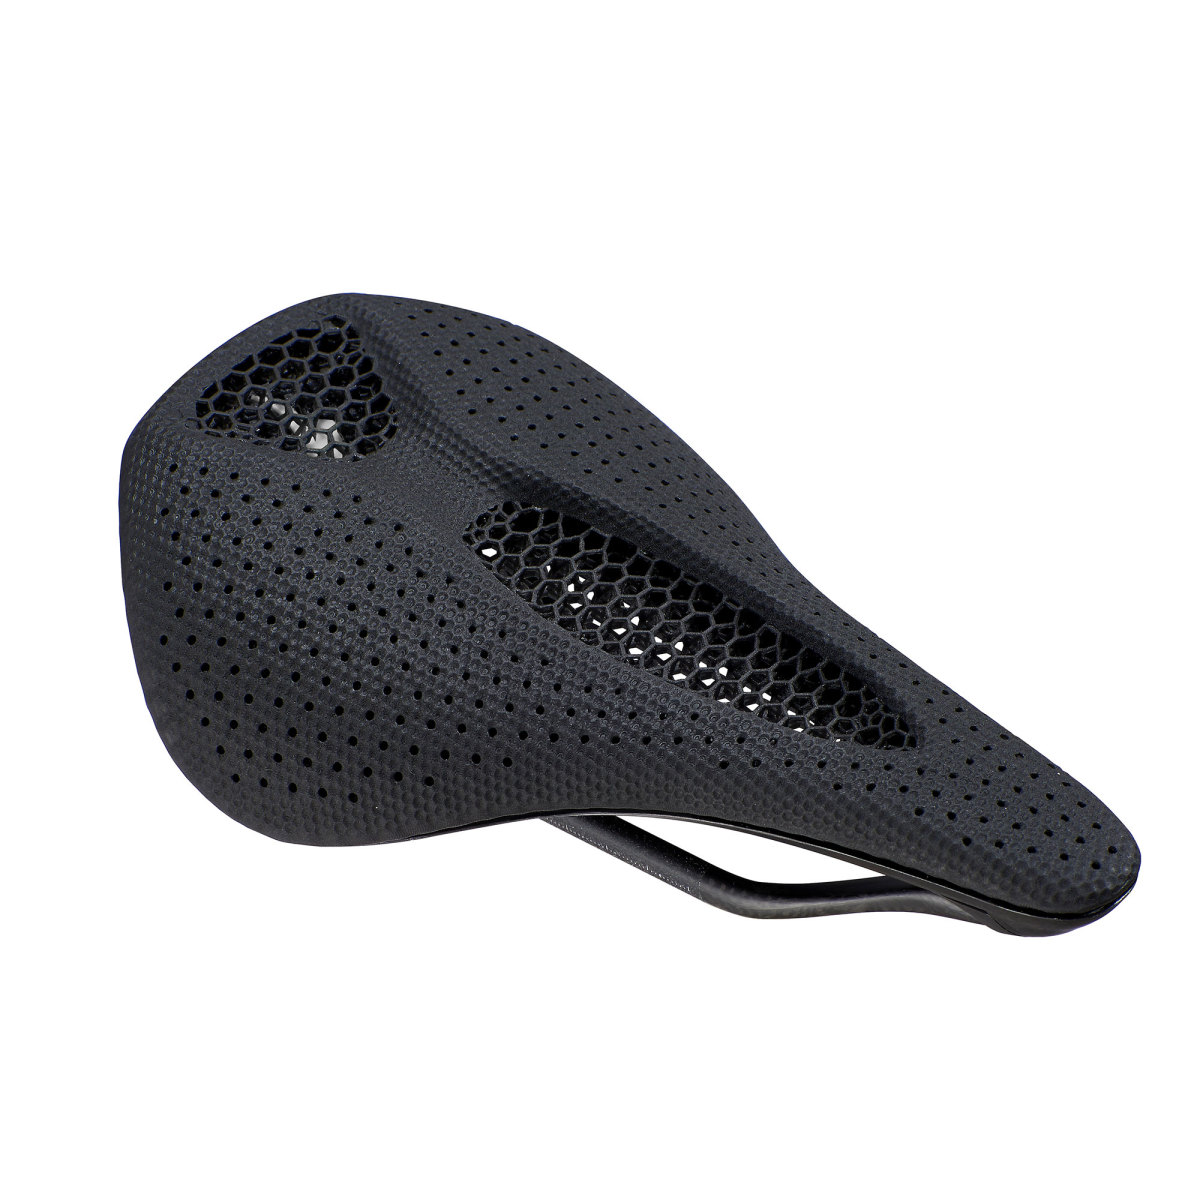 Specialized Power Saddle with Mirro